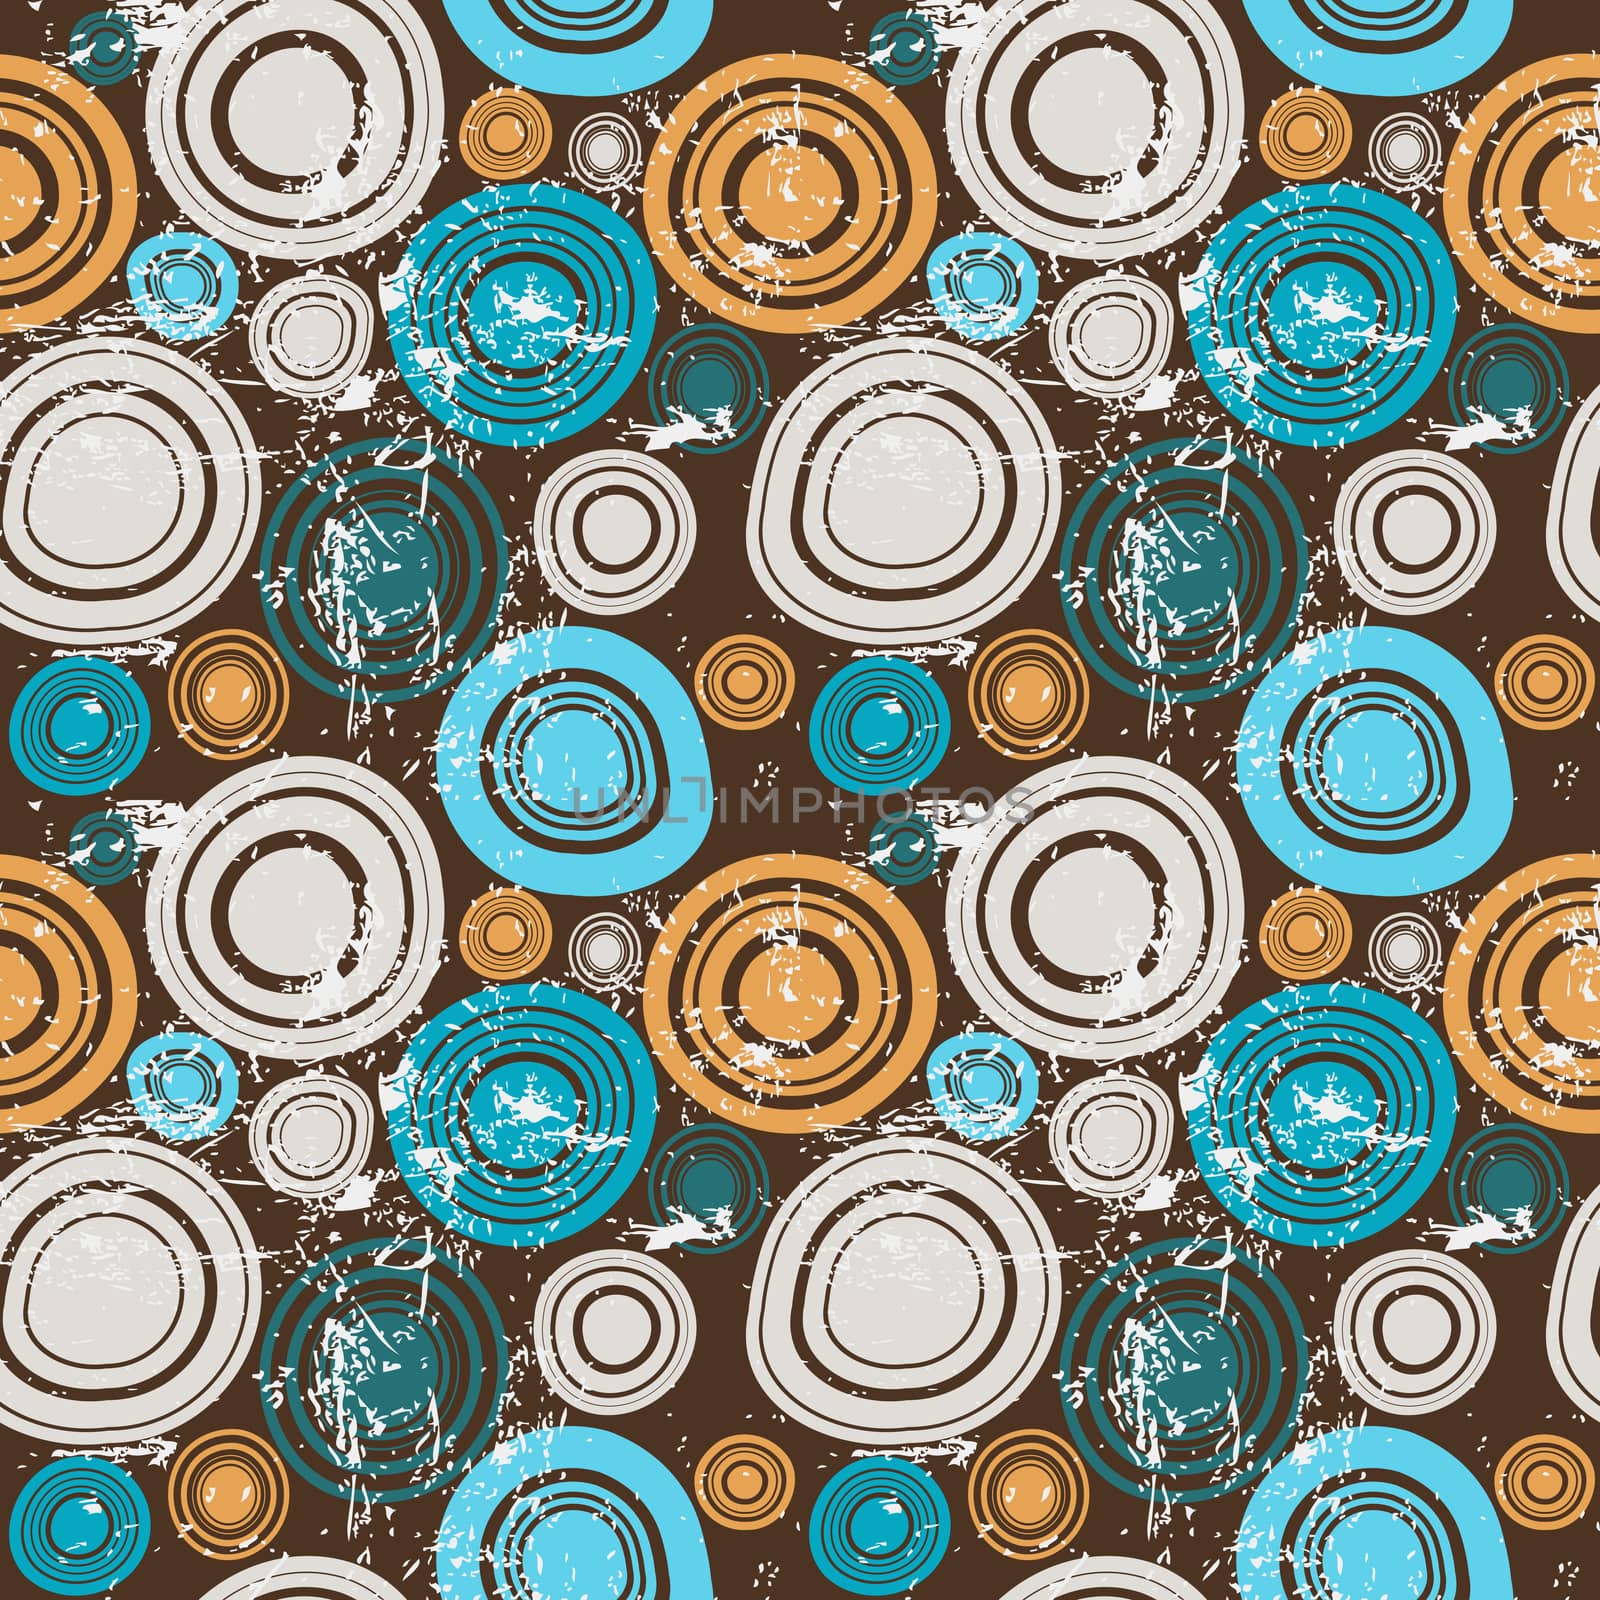 Vintage background with circles by hibrida13